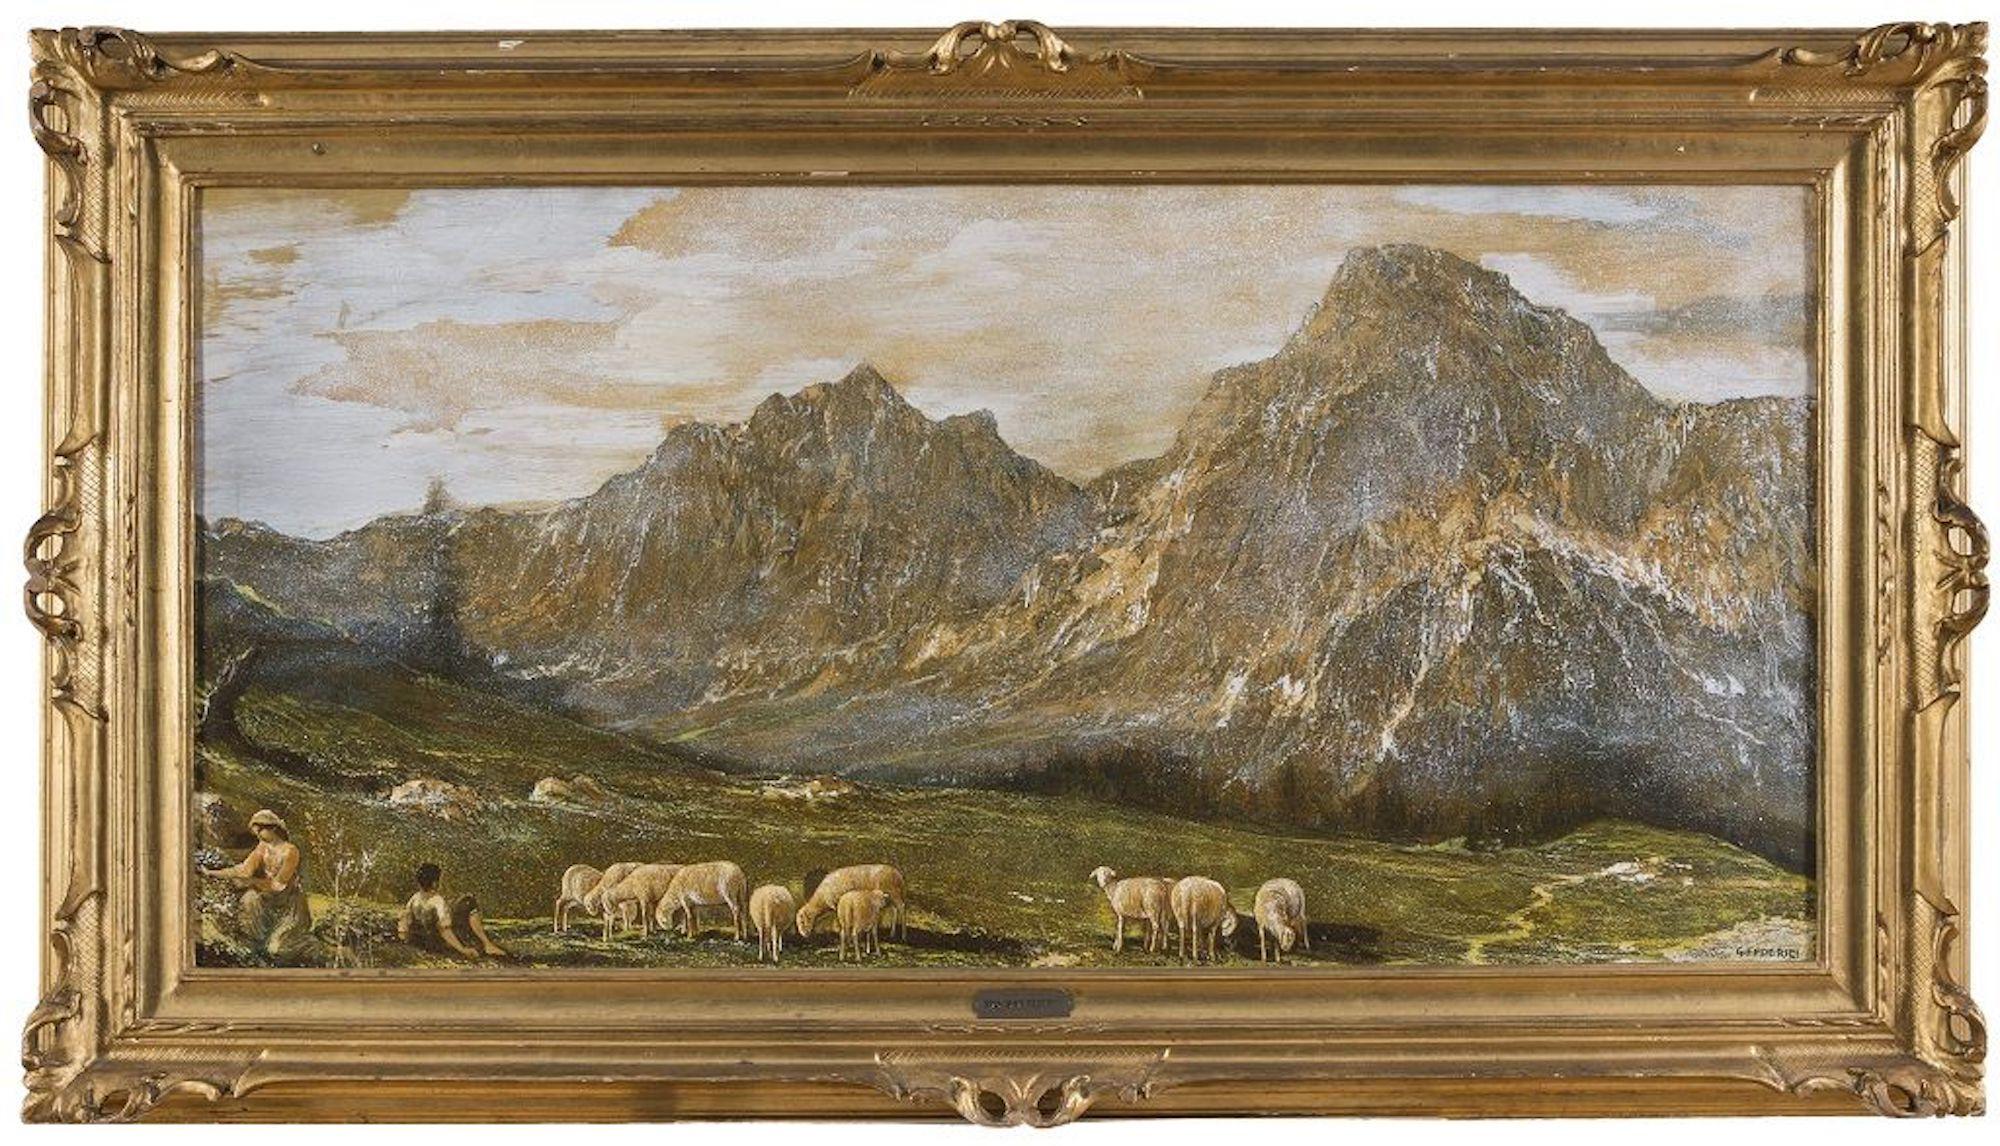 Gino Federici Landscape Painting - Mountainscape with Pasture - Oil on Canvas by G. Federici - Early 20th Century